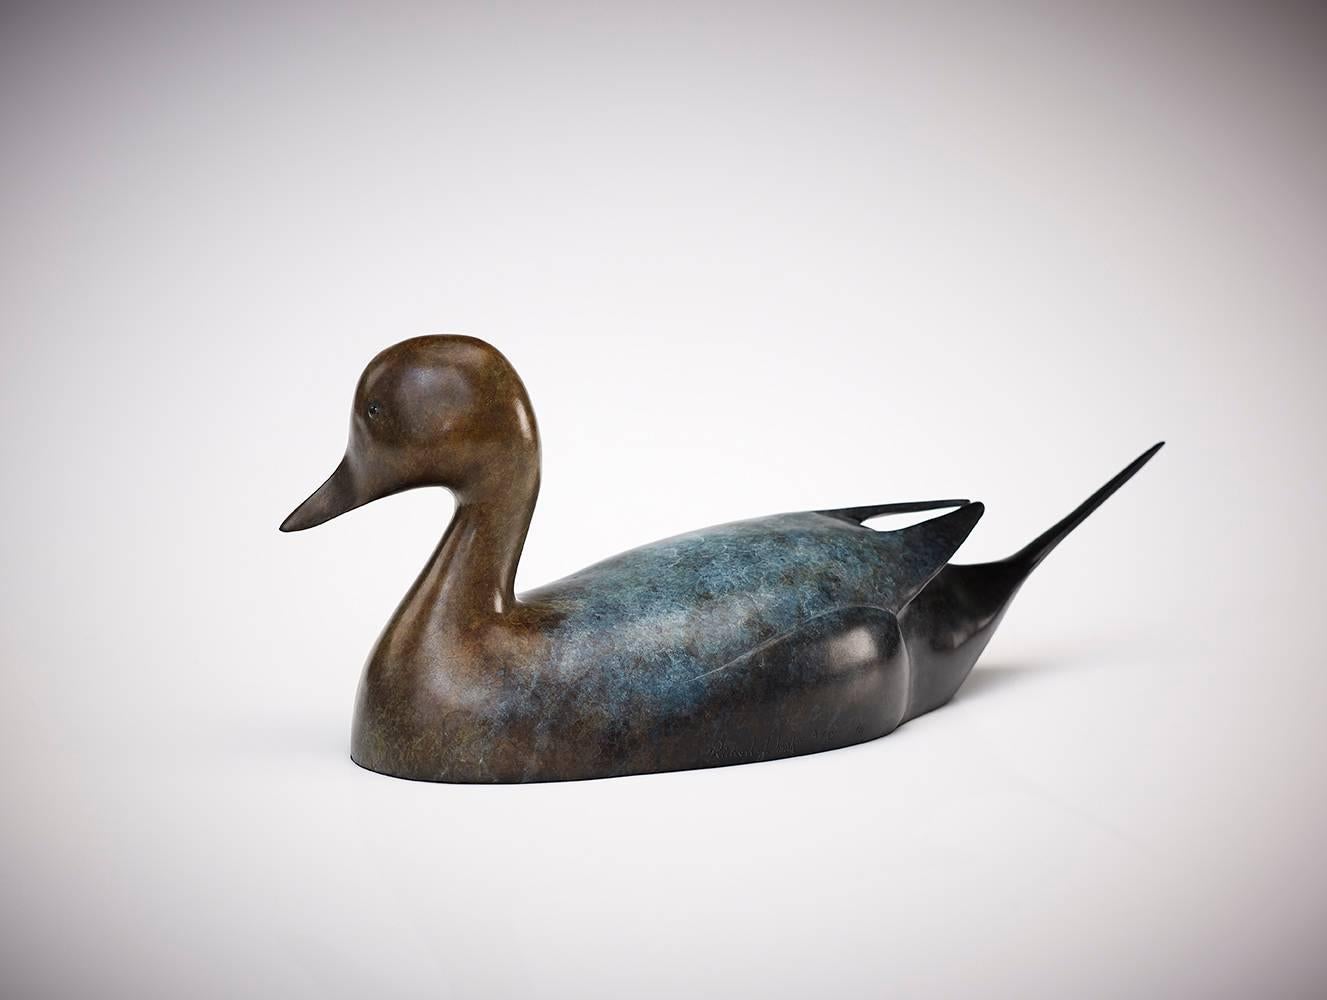 'Pintail Drake' is a Bronze sculpture full of personality. Richard Smith conveys so much character in such simple lines, exemplifying a truly wonderful talent. The fantastic richly detailed finish and colourful Patina really adds to the depth to the